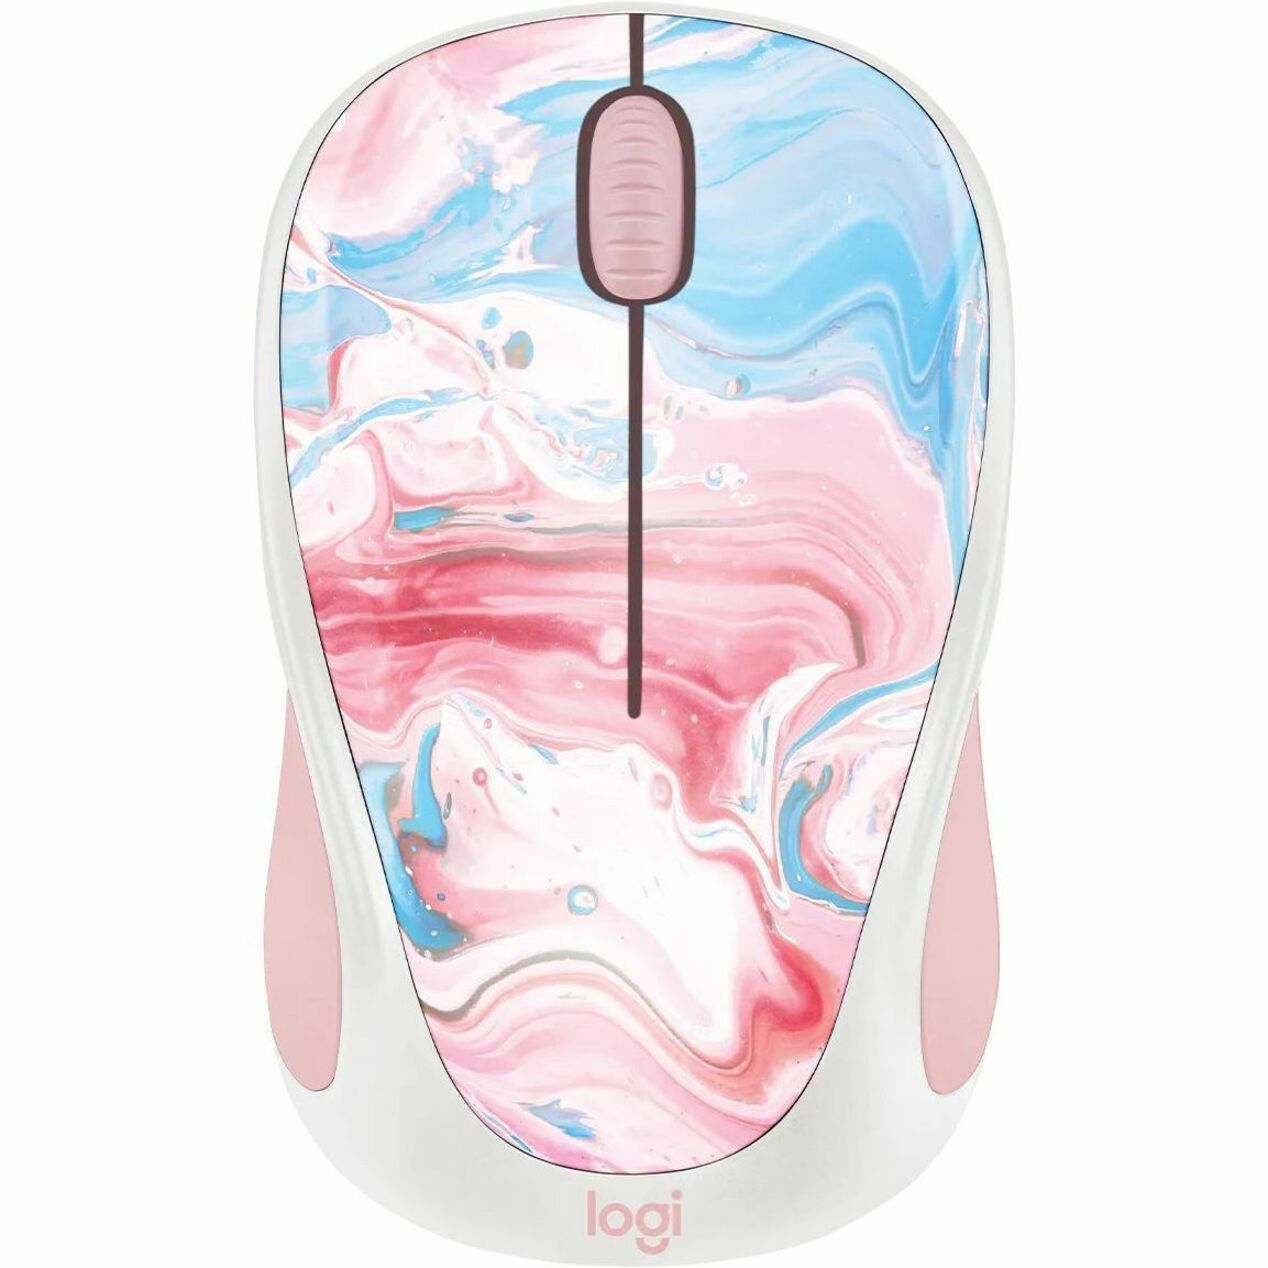 Logitech 910-007055 Design Collection Limited Edition Wireless Mouse, Ergonomic Fit, Small Size, Cotton Candy Design